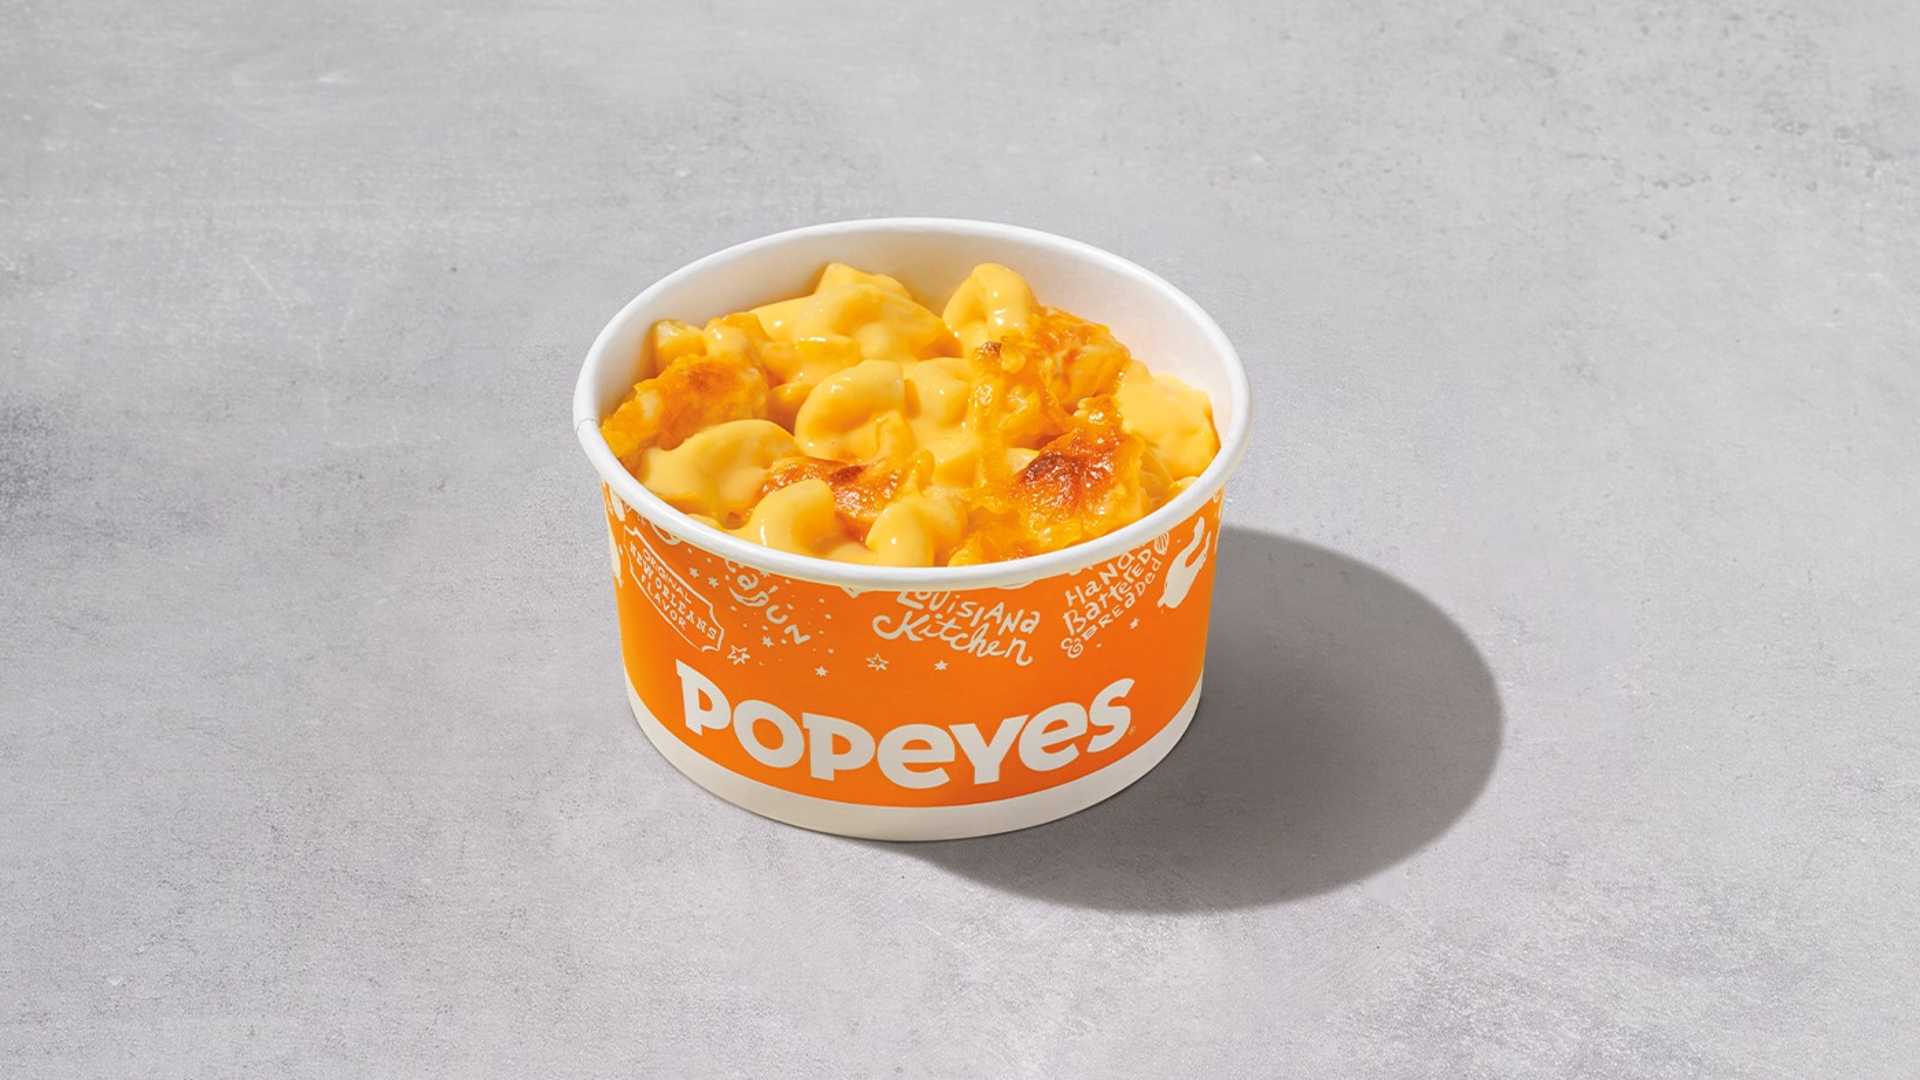 Mac and cheese from Popeyes Louisiana Kitchen